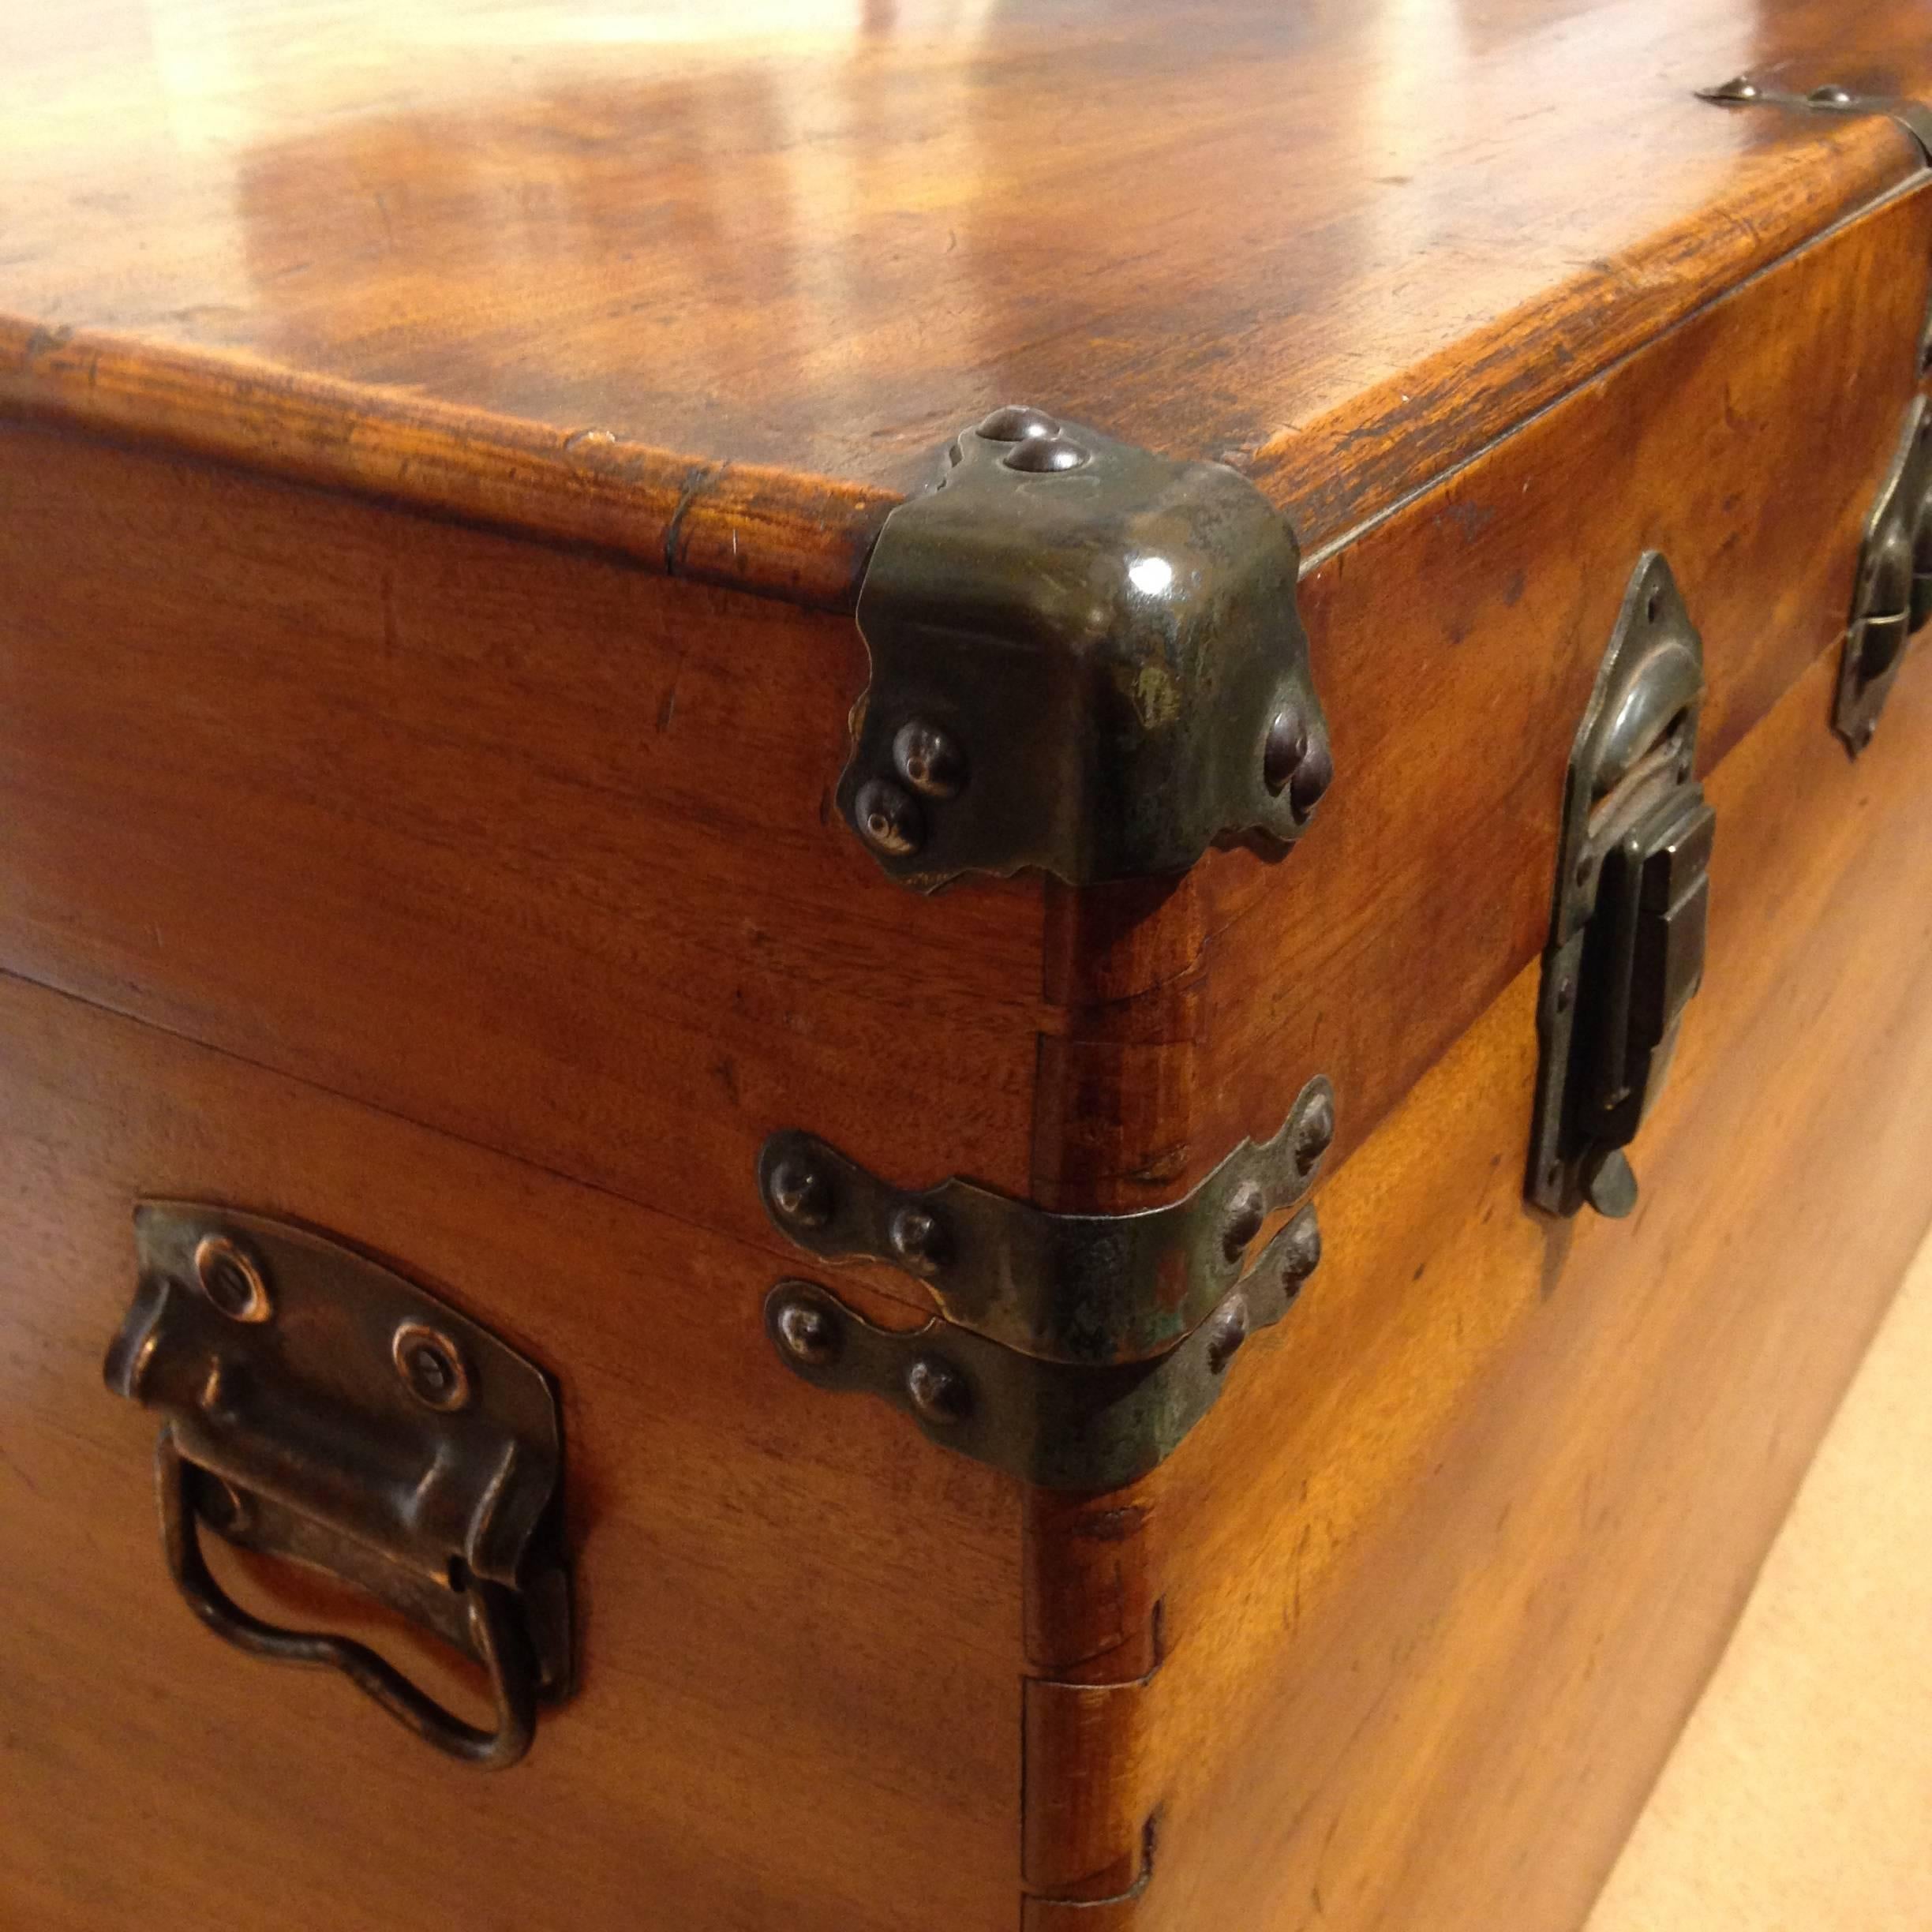 Made for the Chinese export market, this superb, well proportioned camphor wood trunk would make an ideal coffee table in today's world. Brass bound and with metal carrying handles which were a later addition. Ordinarily these trunks were packing